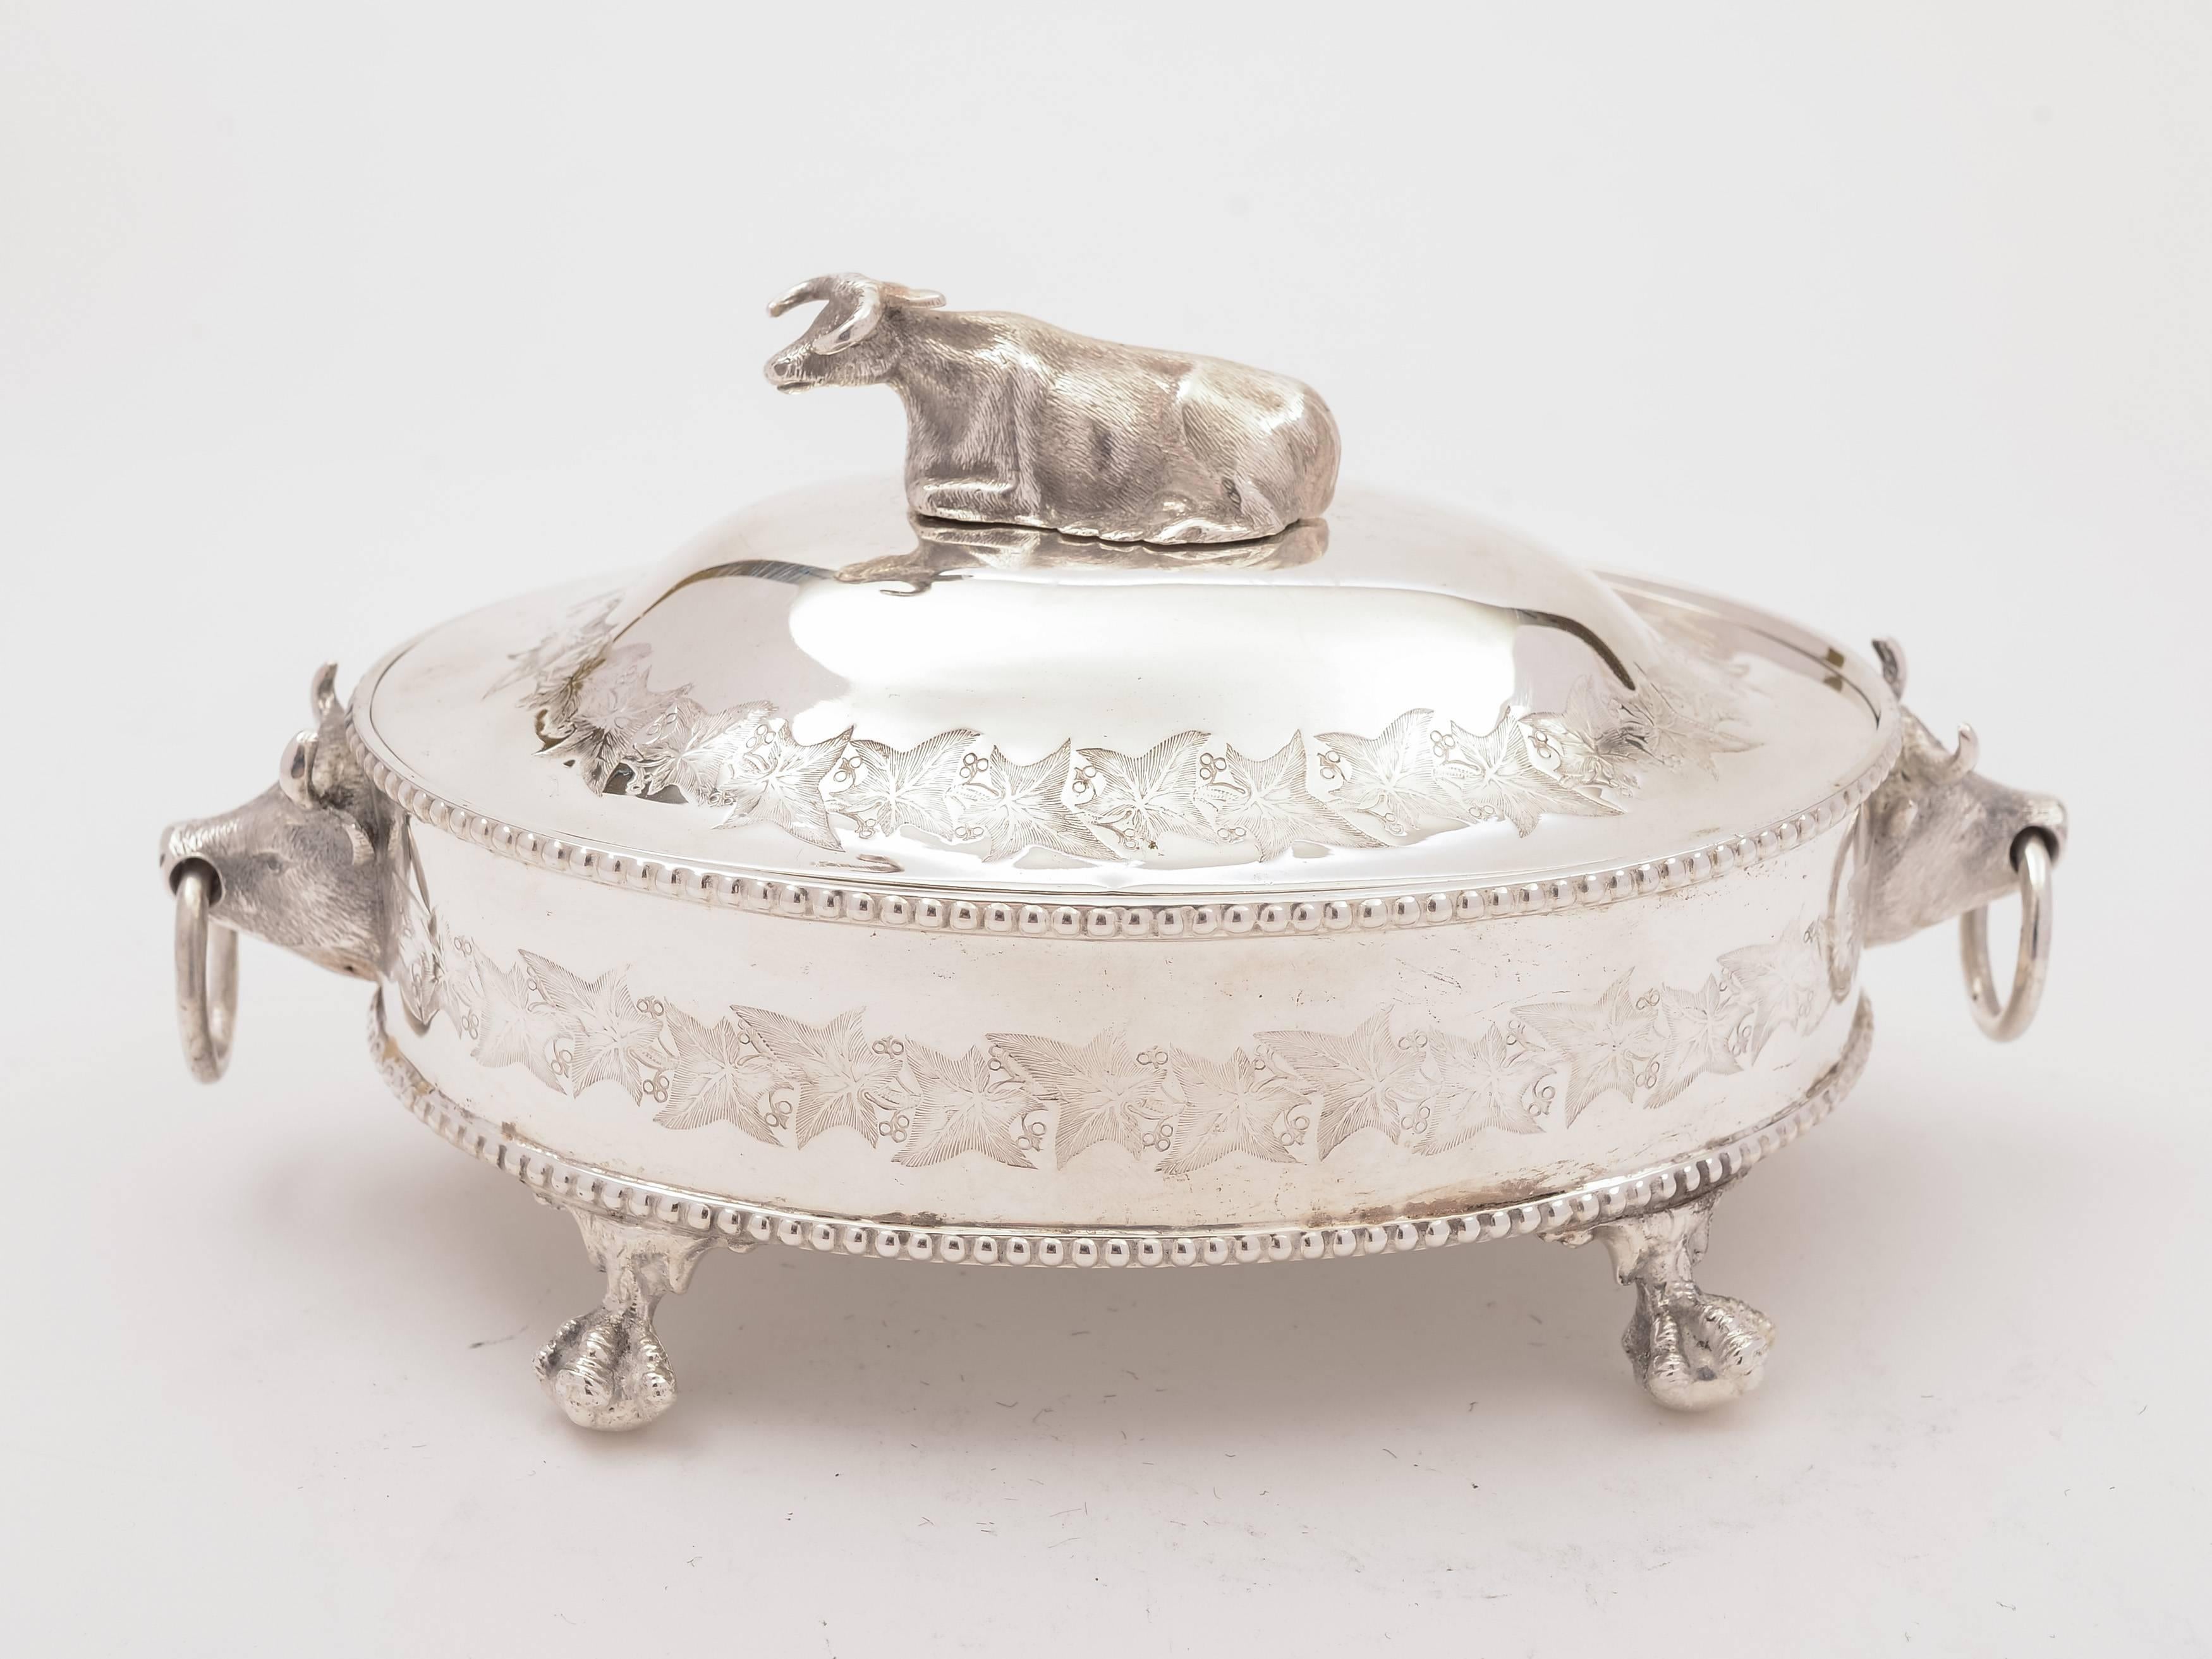 A lovely English Victorian silver plated butter dish. Decorated with bulls heads to each end, a cow finial and engraved ivy leaf decoration to top and sides. Stands on four ball and claw feet and has a frosted glass liner, circa